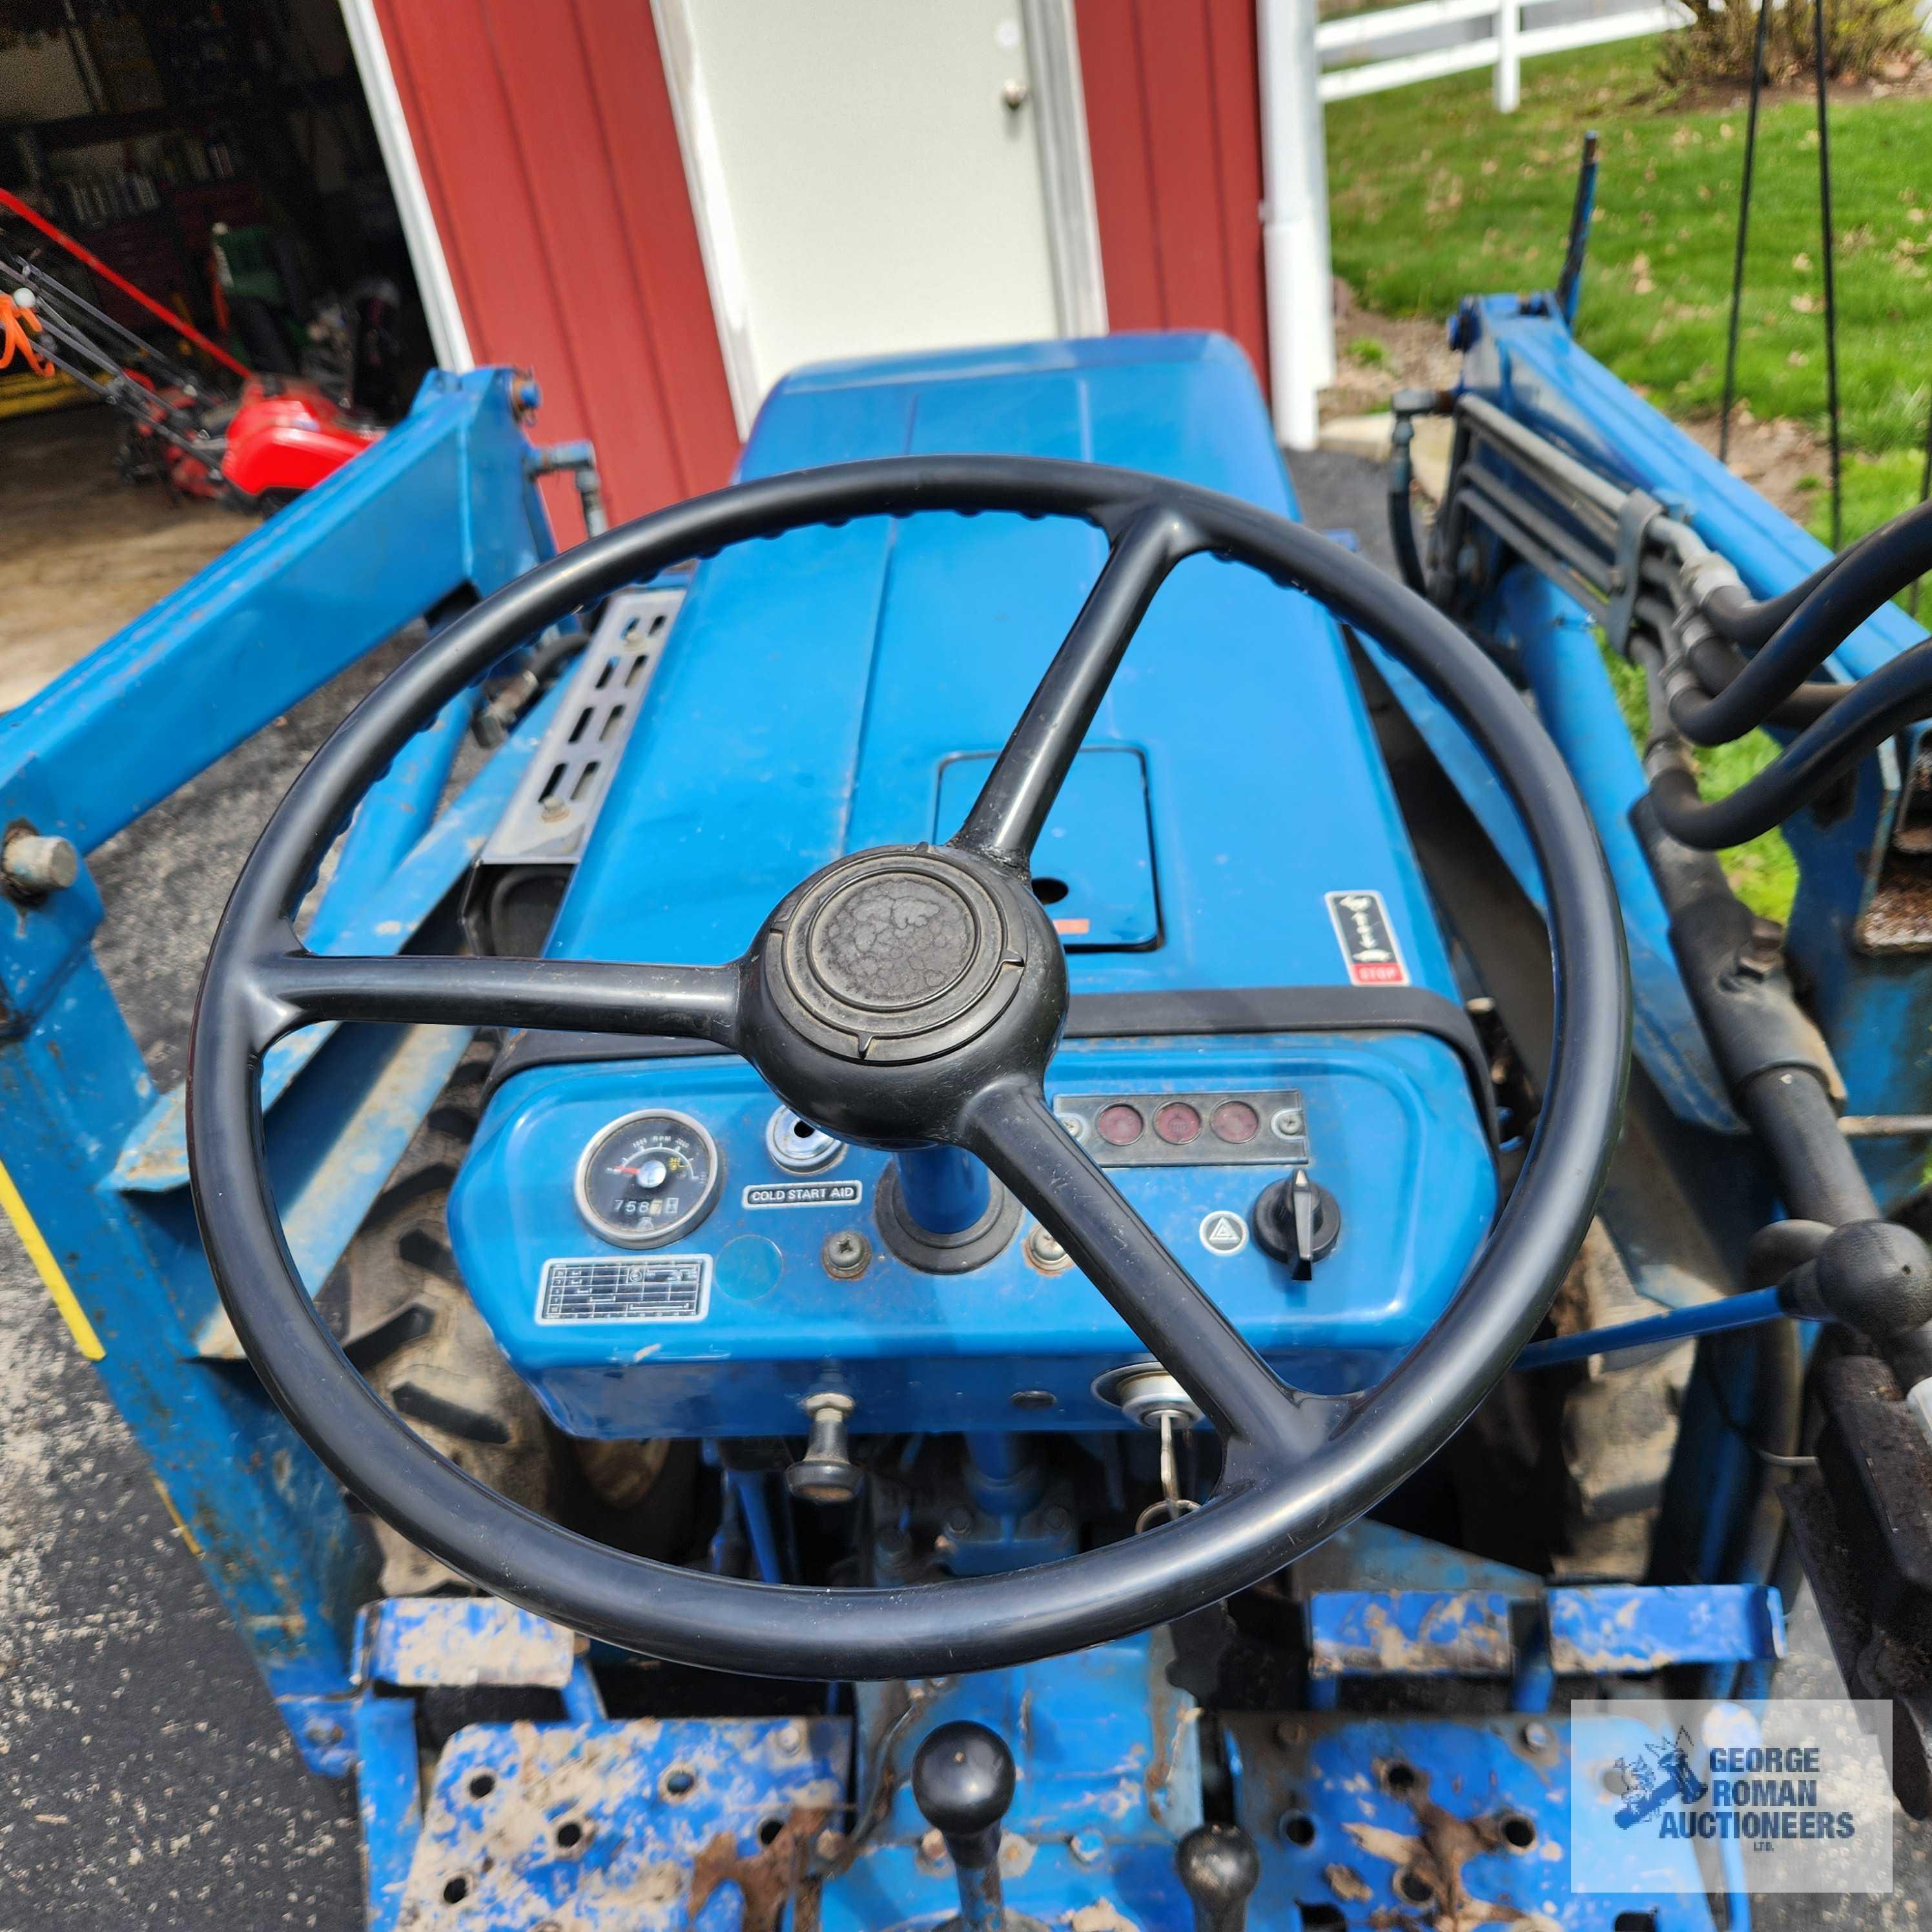 Ford 1200 diesel tractor with Ford 768 loader attachment. Showing 758 hours. Welded hook on bucket.